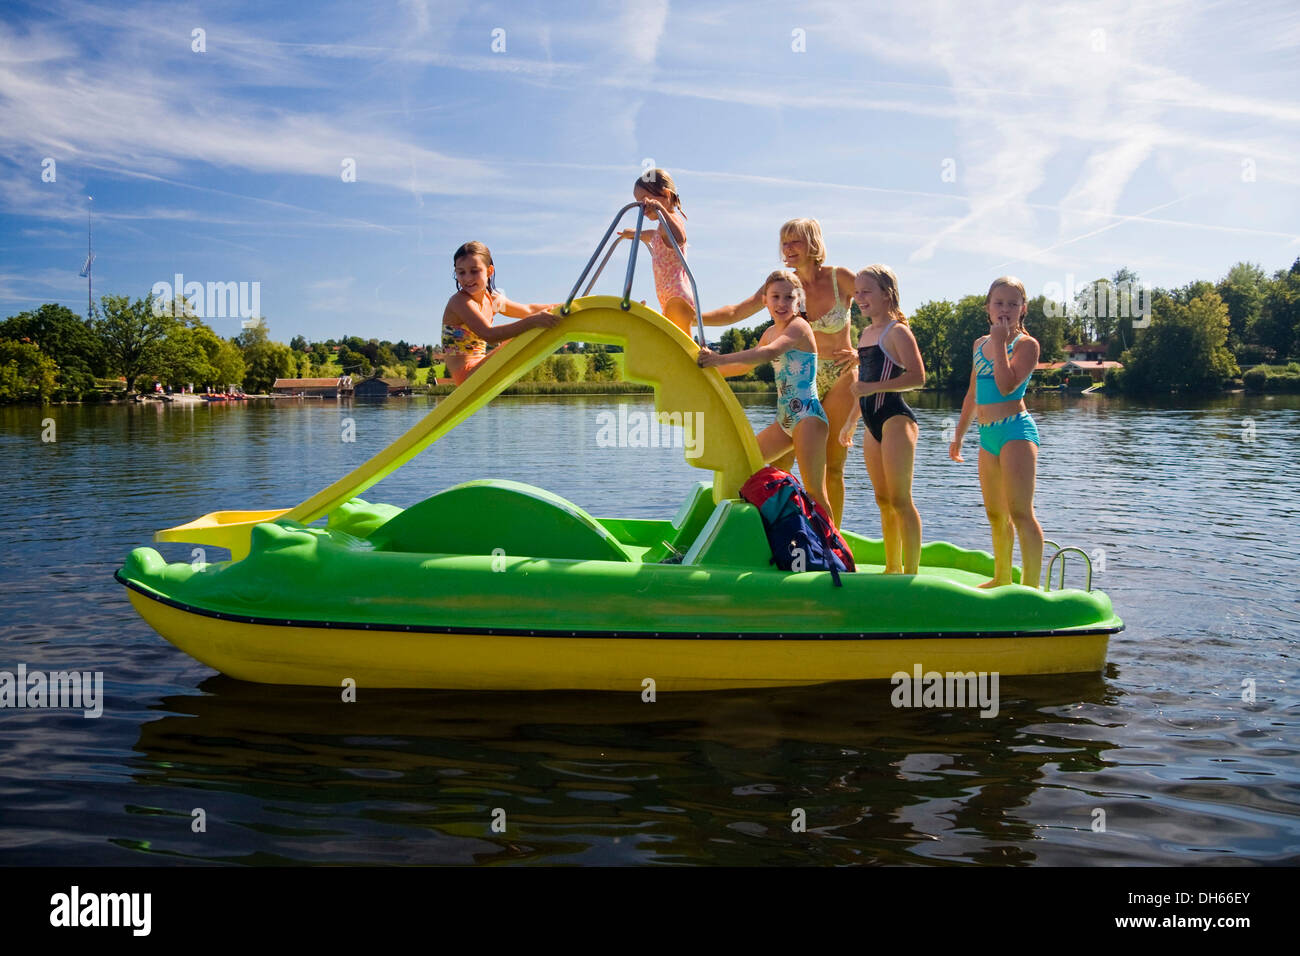 Children, girls, 8 years old, playing on a pedal boat with a slide on lake Staffelsee, Upper Bavaria, Bavaria Stock Photo